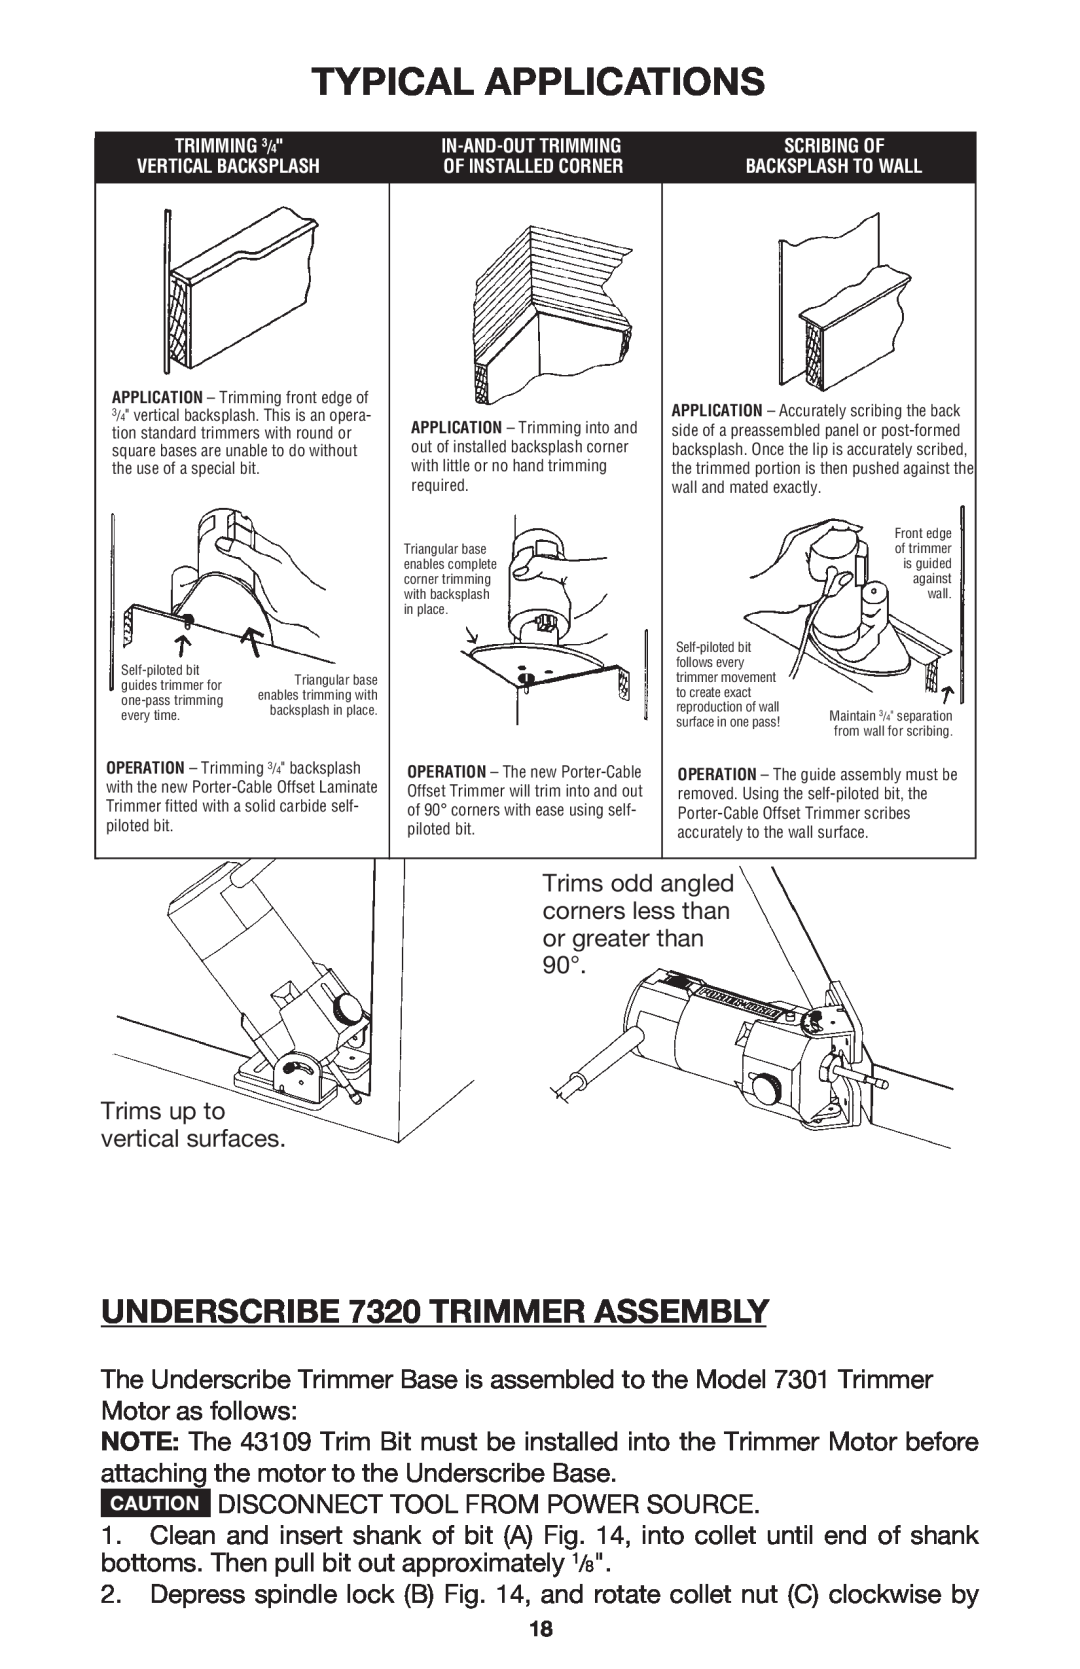 Porter-Cable 7310 instruction manual UNDERSCRIBE 7320 TRIMMER ASSEMBLY, Typical Applications 